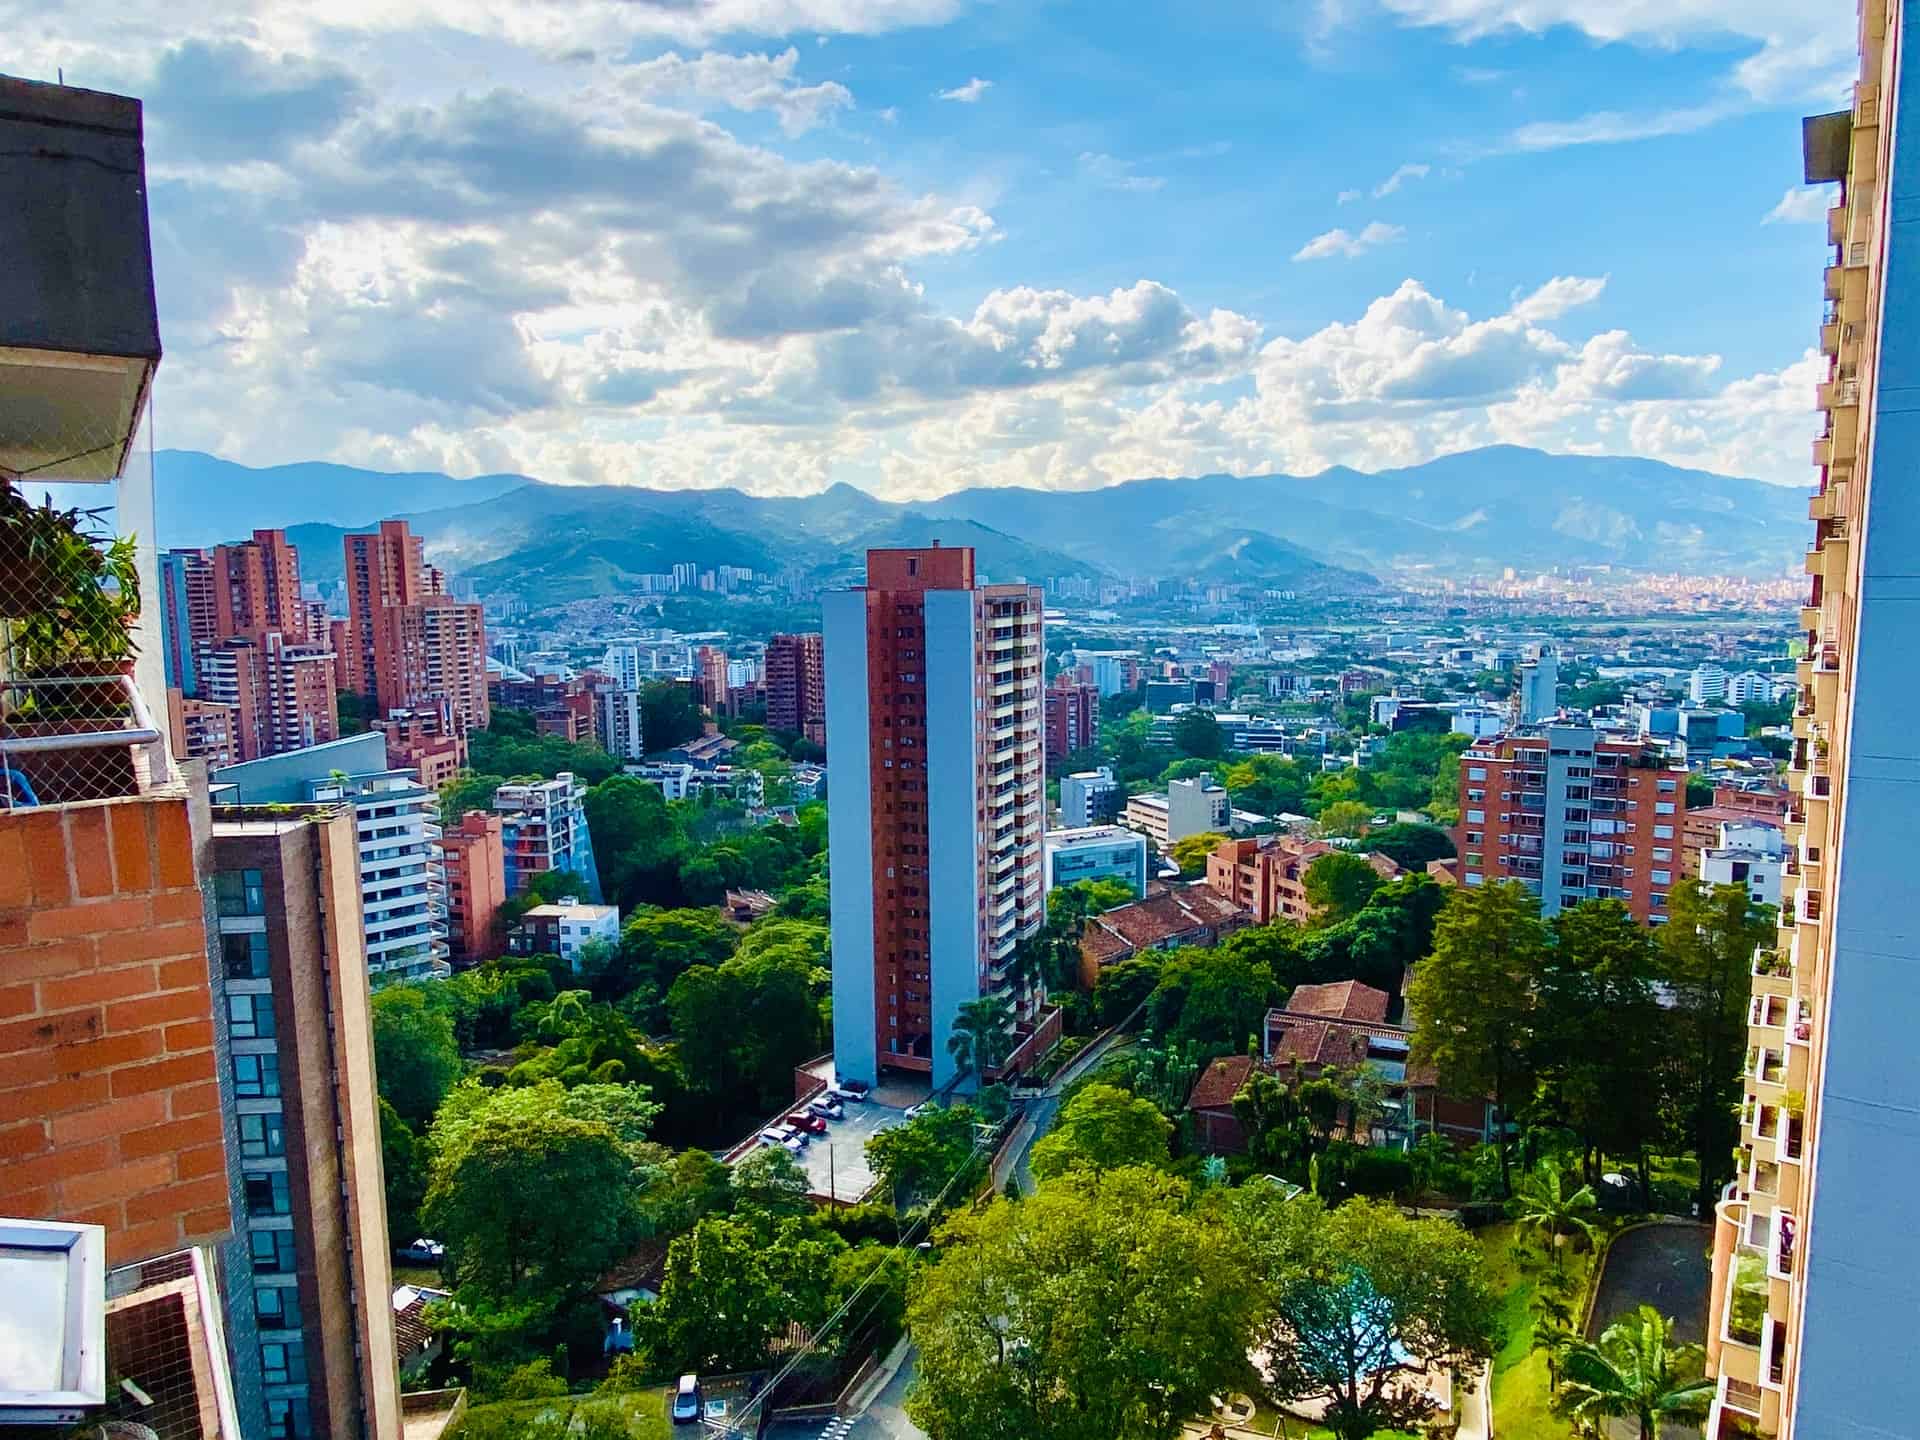 Best things to do in Medellin Colombia - Joseph Hogue - Mix of nature and man-made buildings by Mike Swigunski on Unsplash